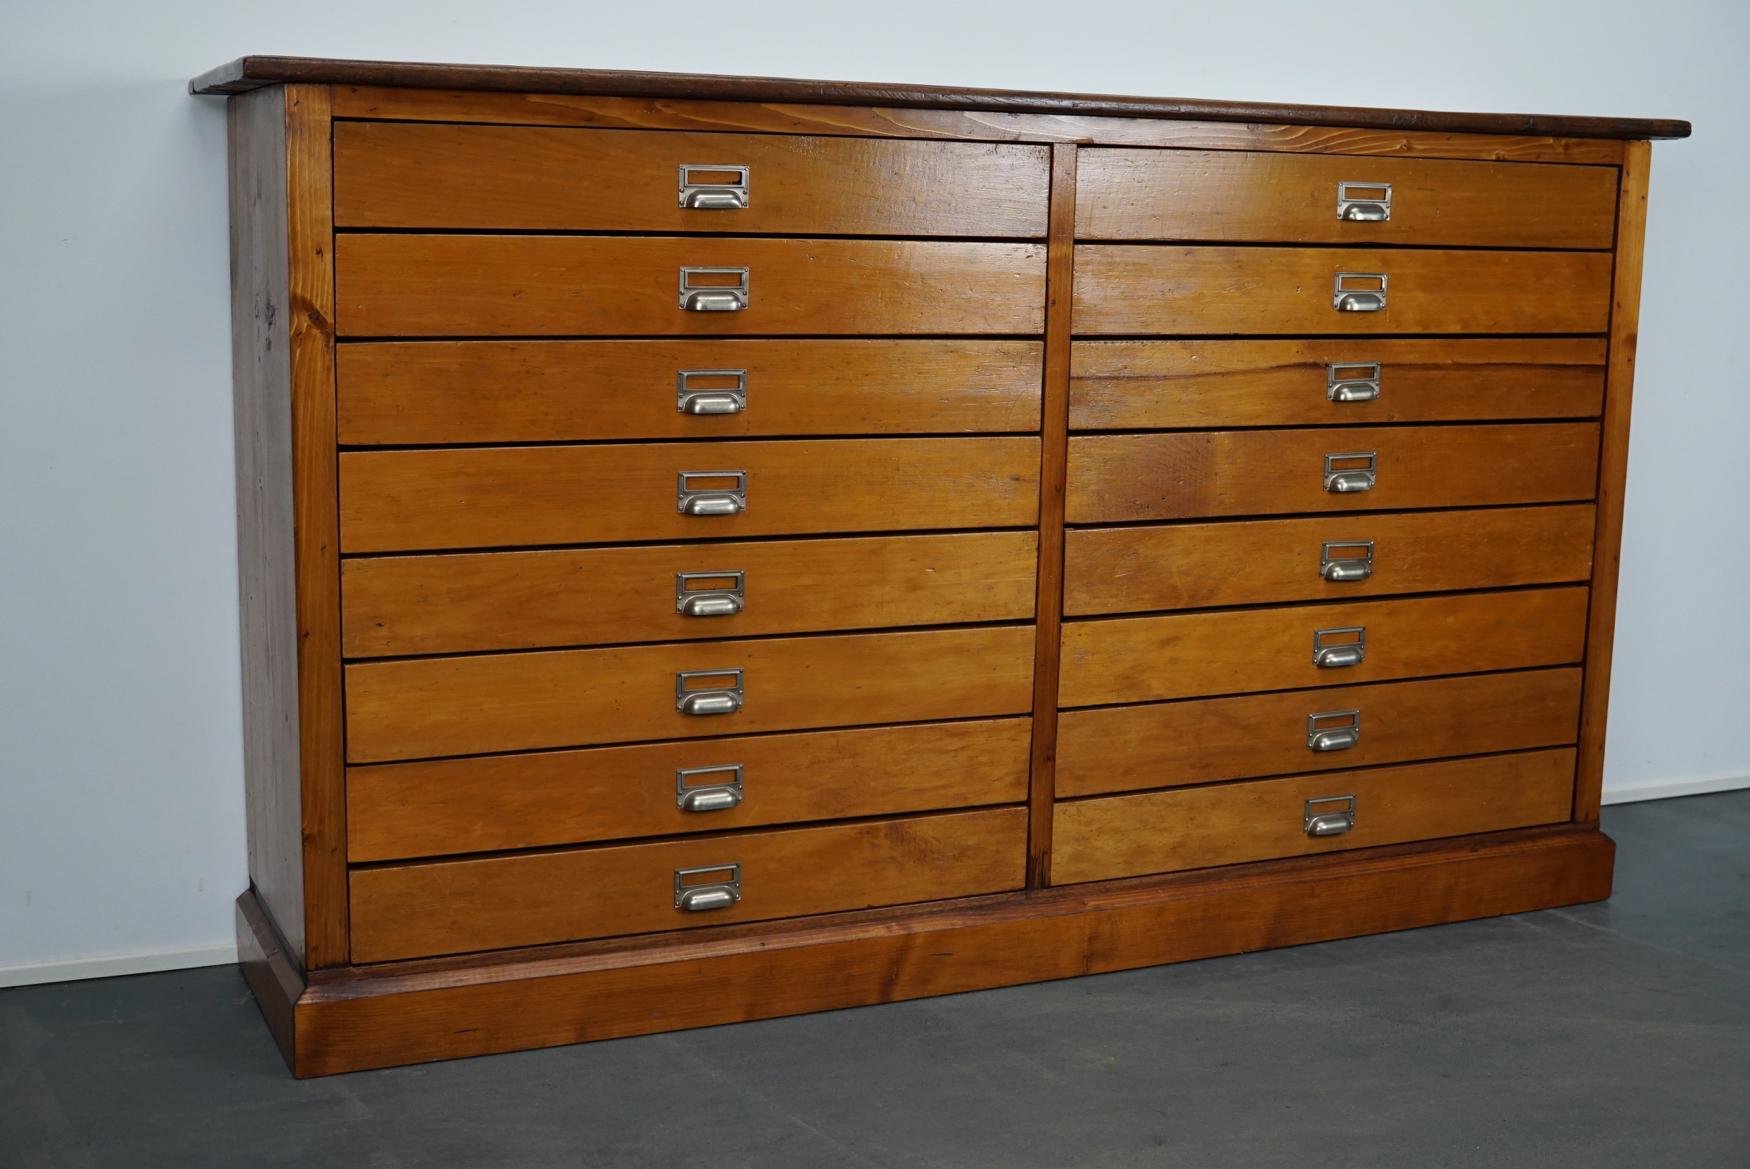 This apothecary / filing cabinet was produced during the 1950s in Germany. This piece features 16 drawers. The interior dimensions of the drawers are: D x W x H 30 x 71.5 x 8.5 cm.